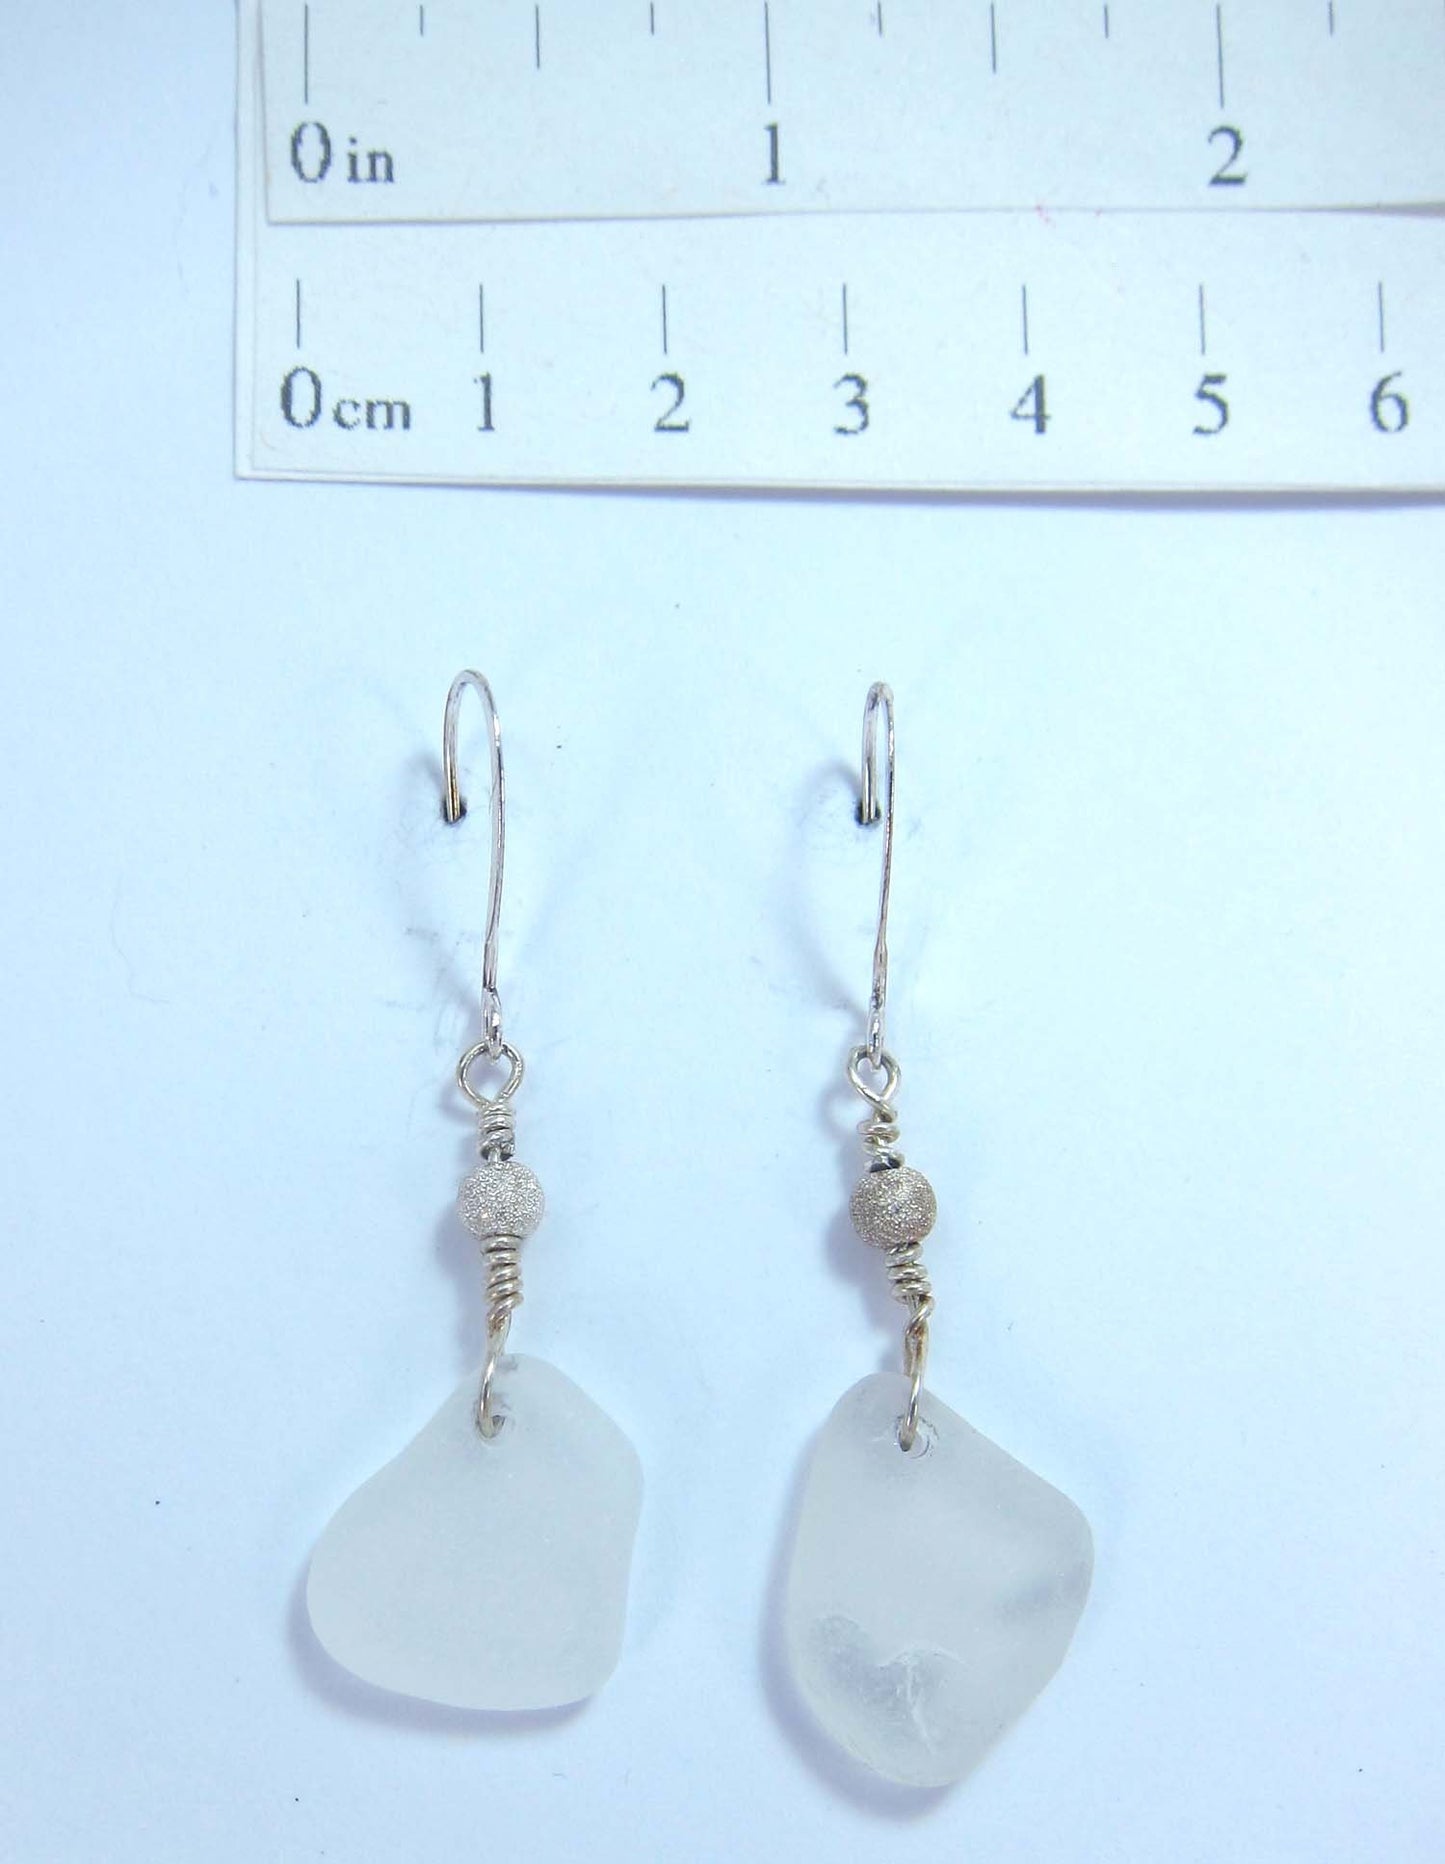 Stardust Earrings - White Cape Breton, Nova Scotia sea glass with sparkly Sterling silver bead on a nickle-free hook